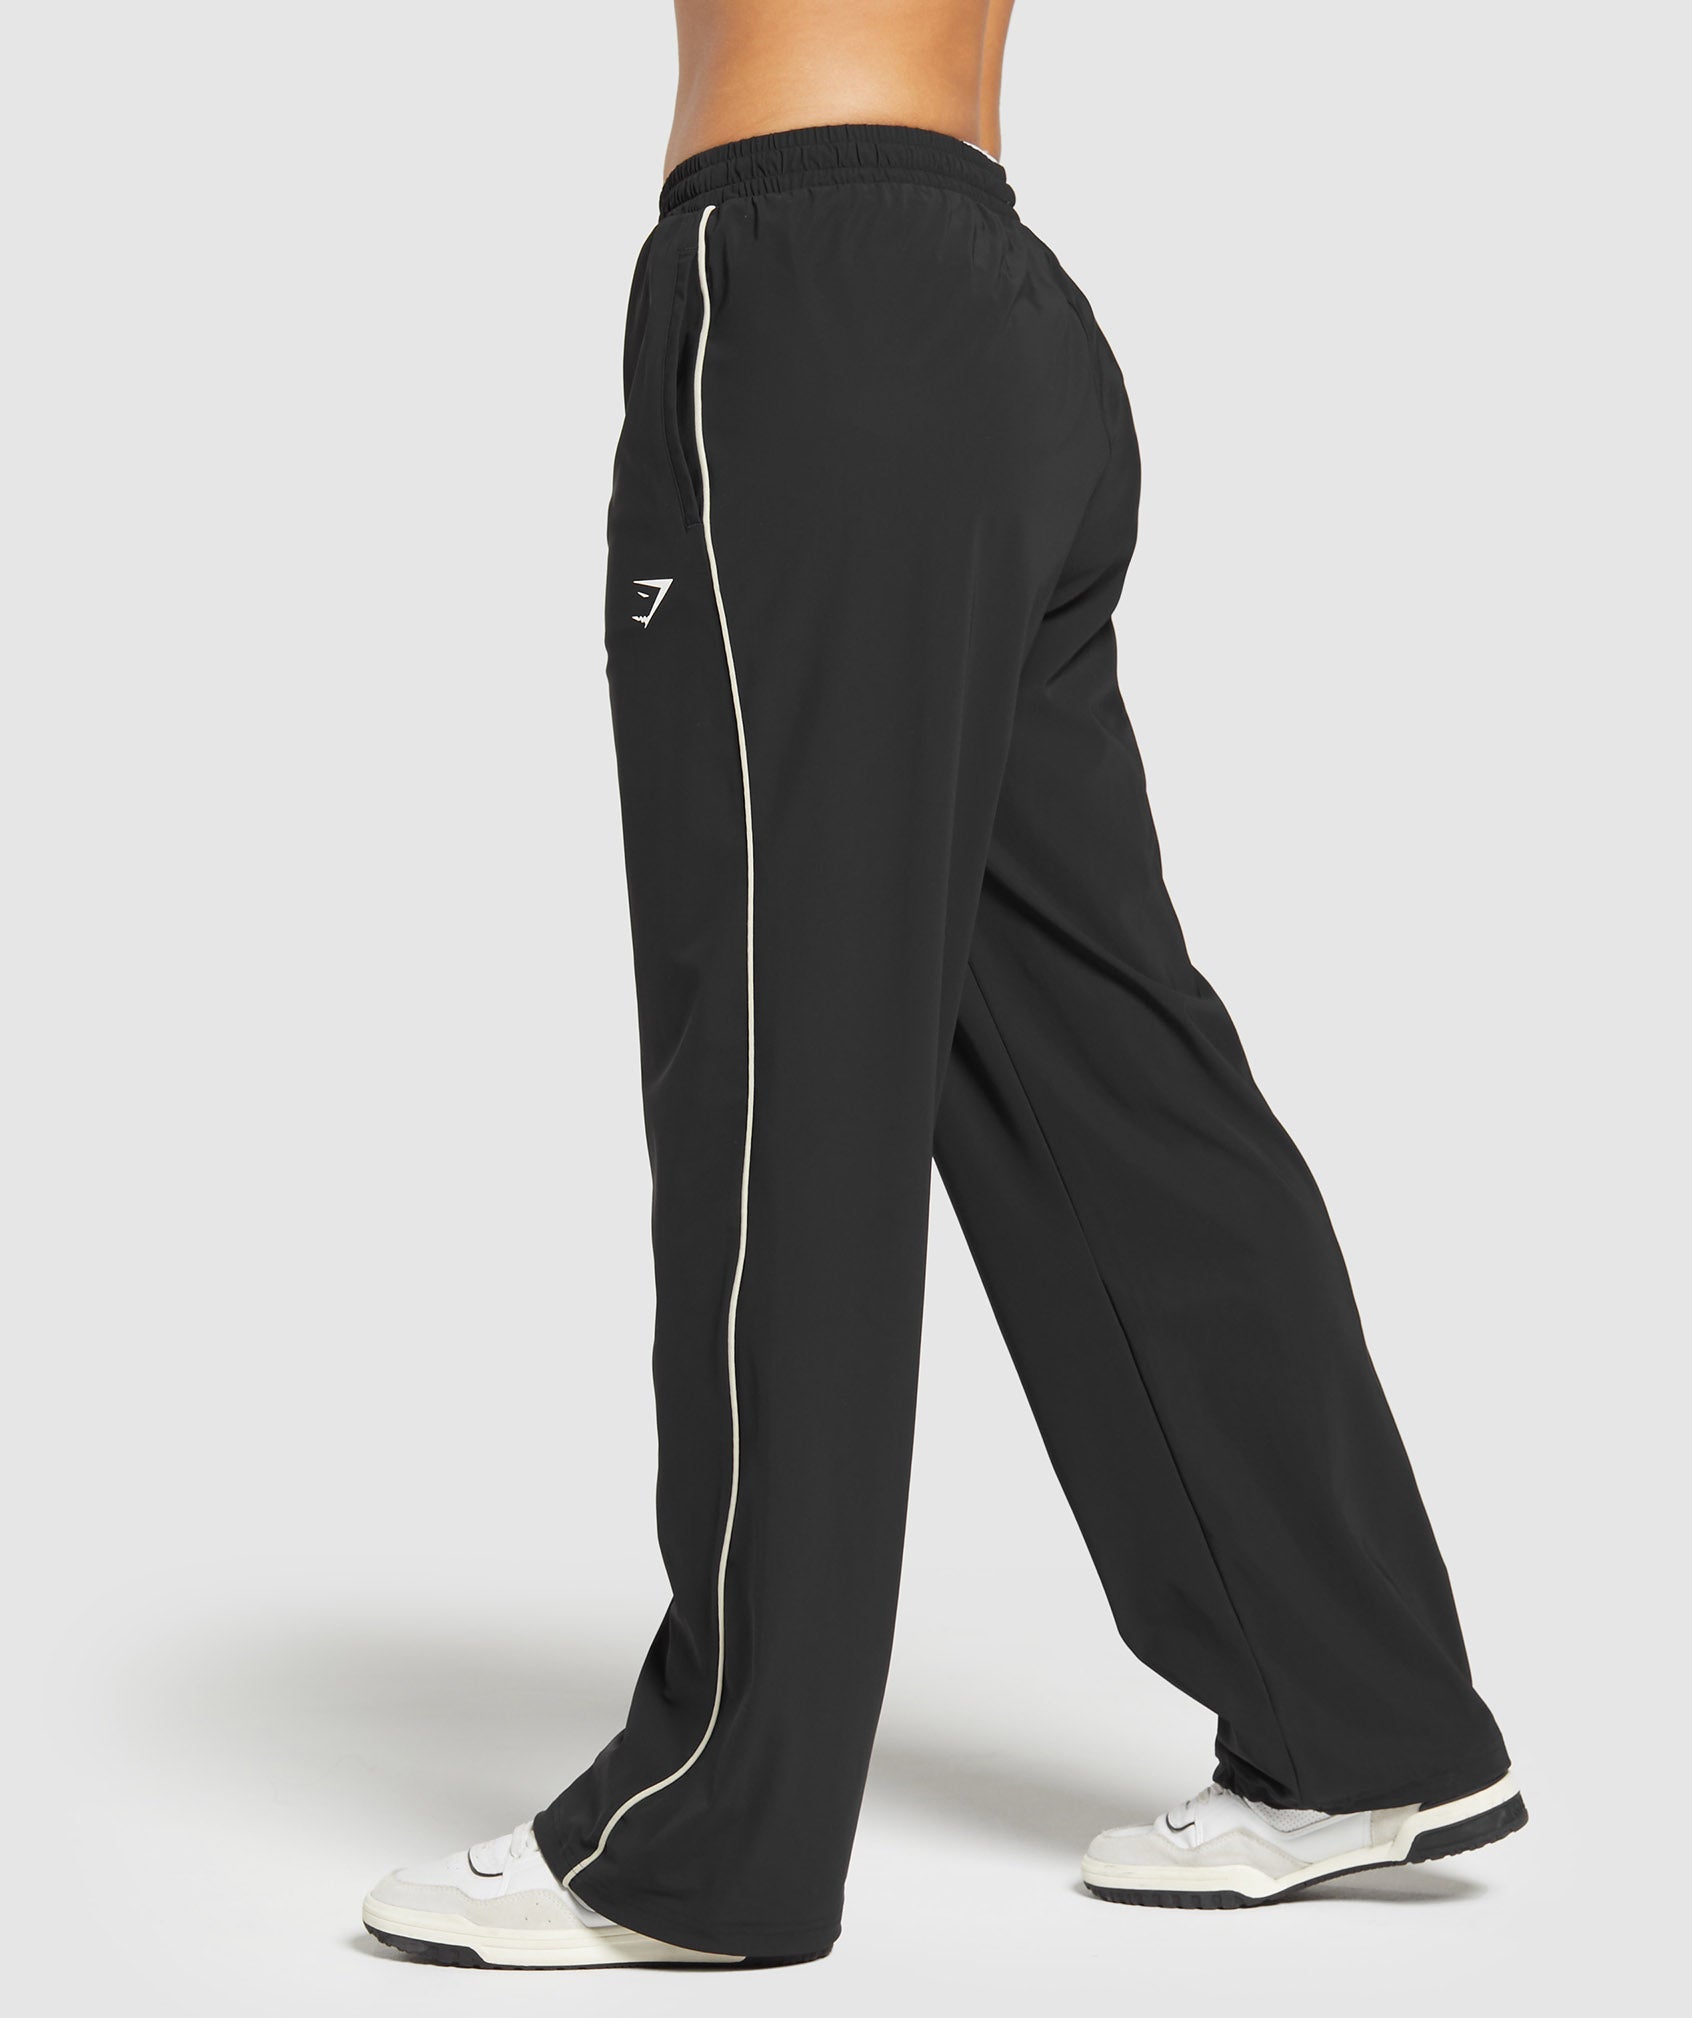 Stitch Feature Woven Pants in Black - view 3